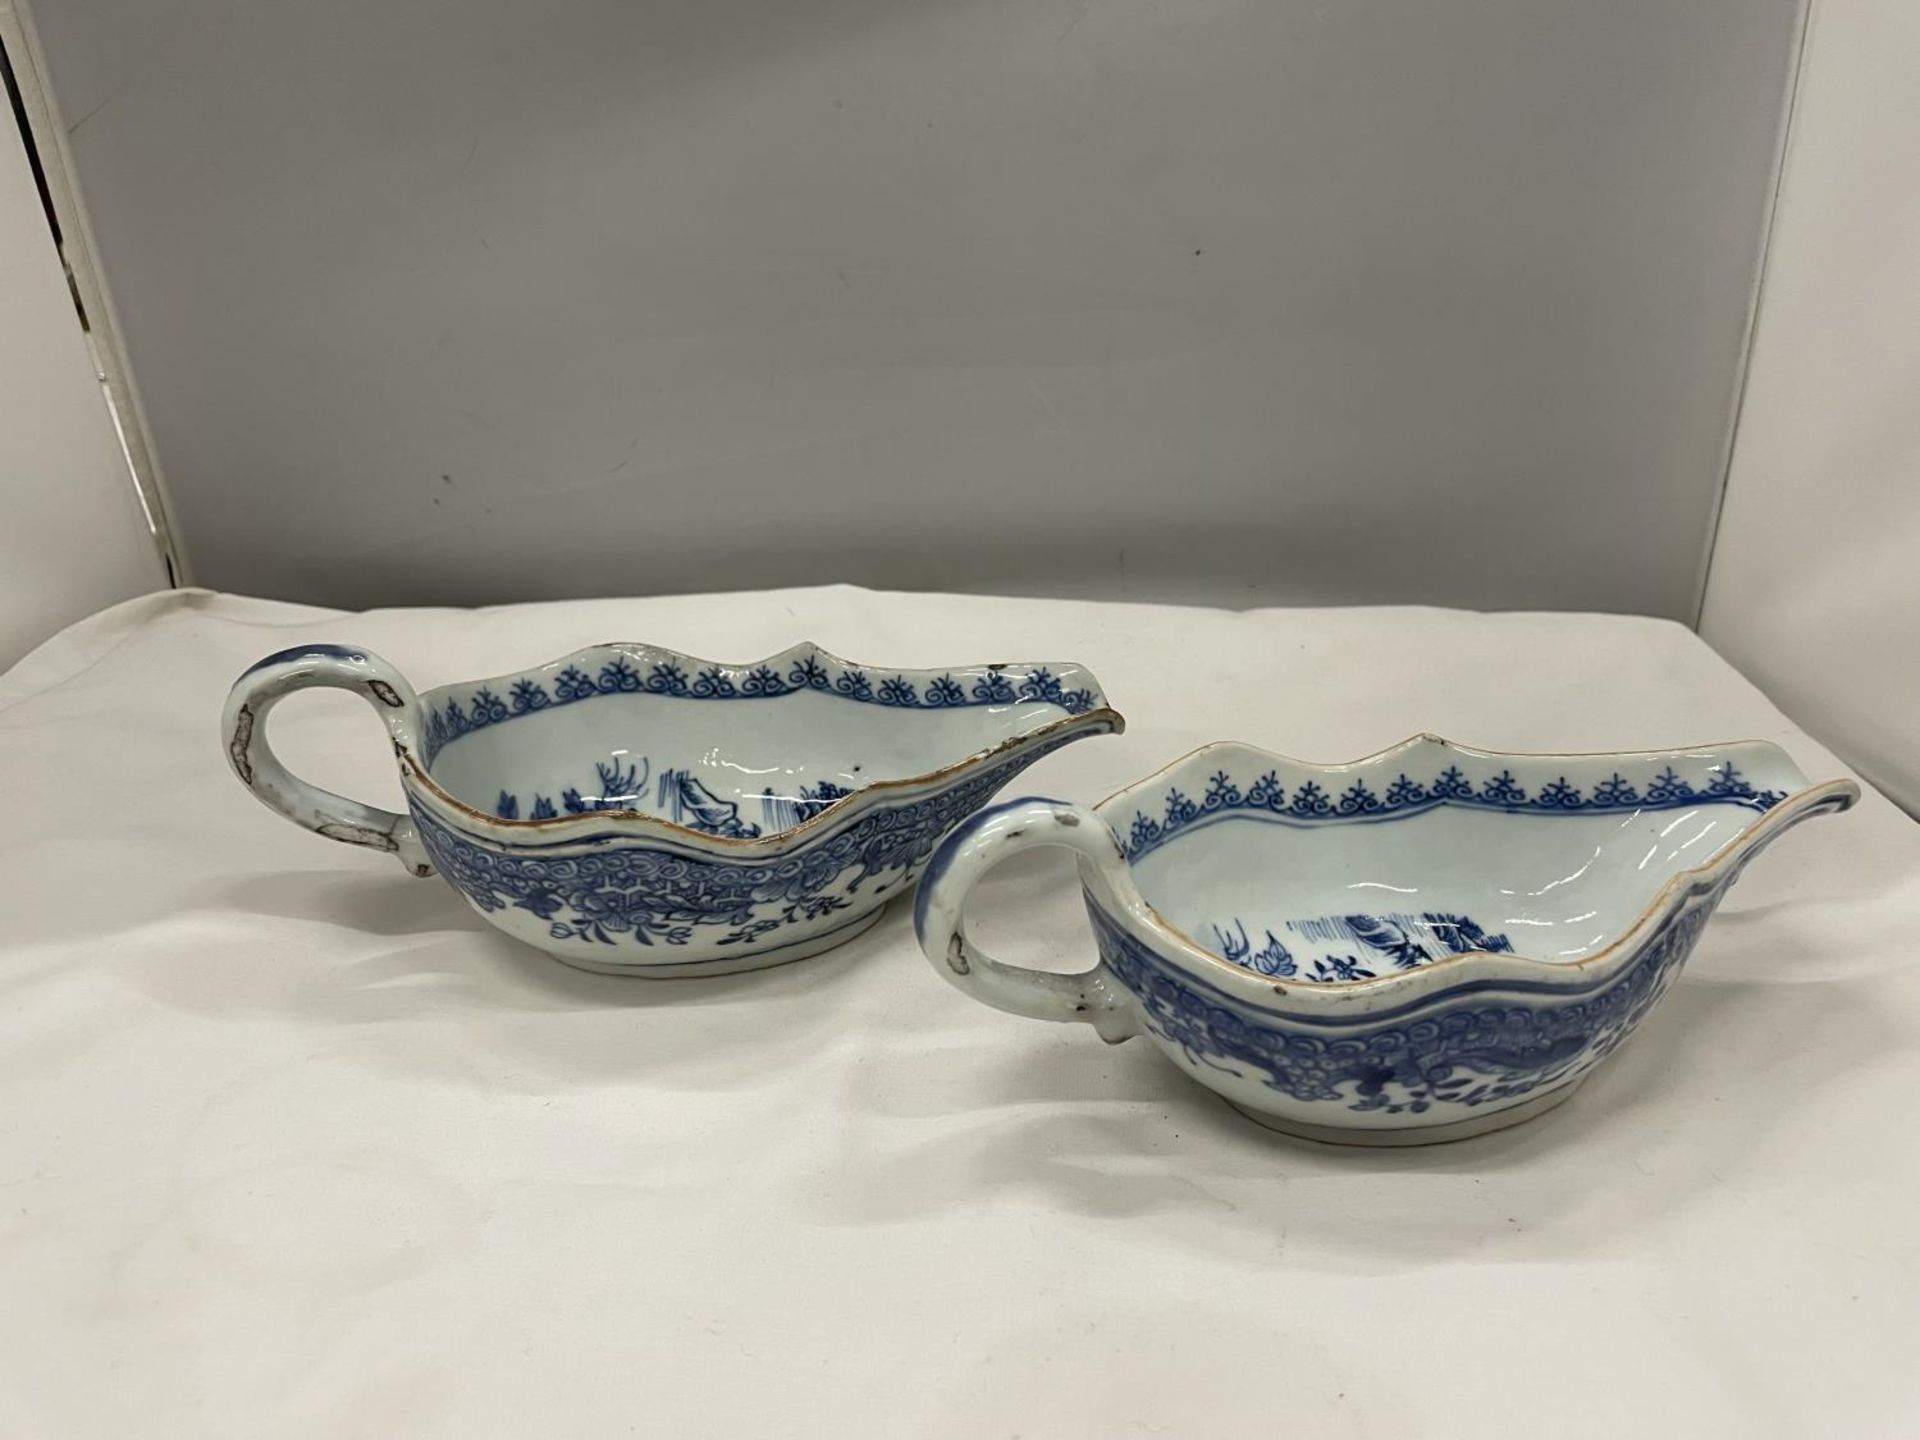 A BELIEVED TO BE LATE 18TH/EARLY 19TH CENTURY CHINESE QING DYNASTY/NANKIN BLUE AND WHITE SAUCE - Image 3 of 8